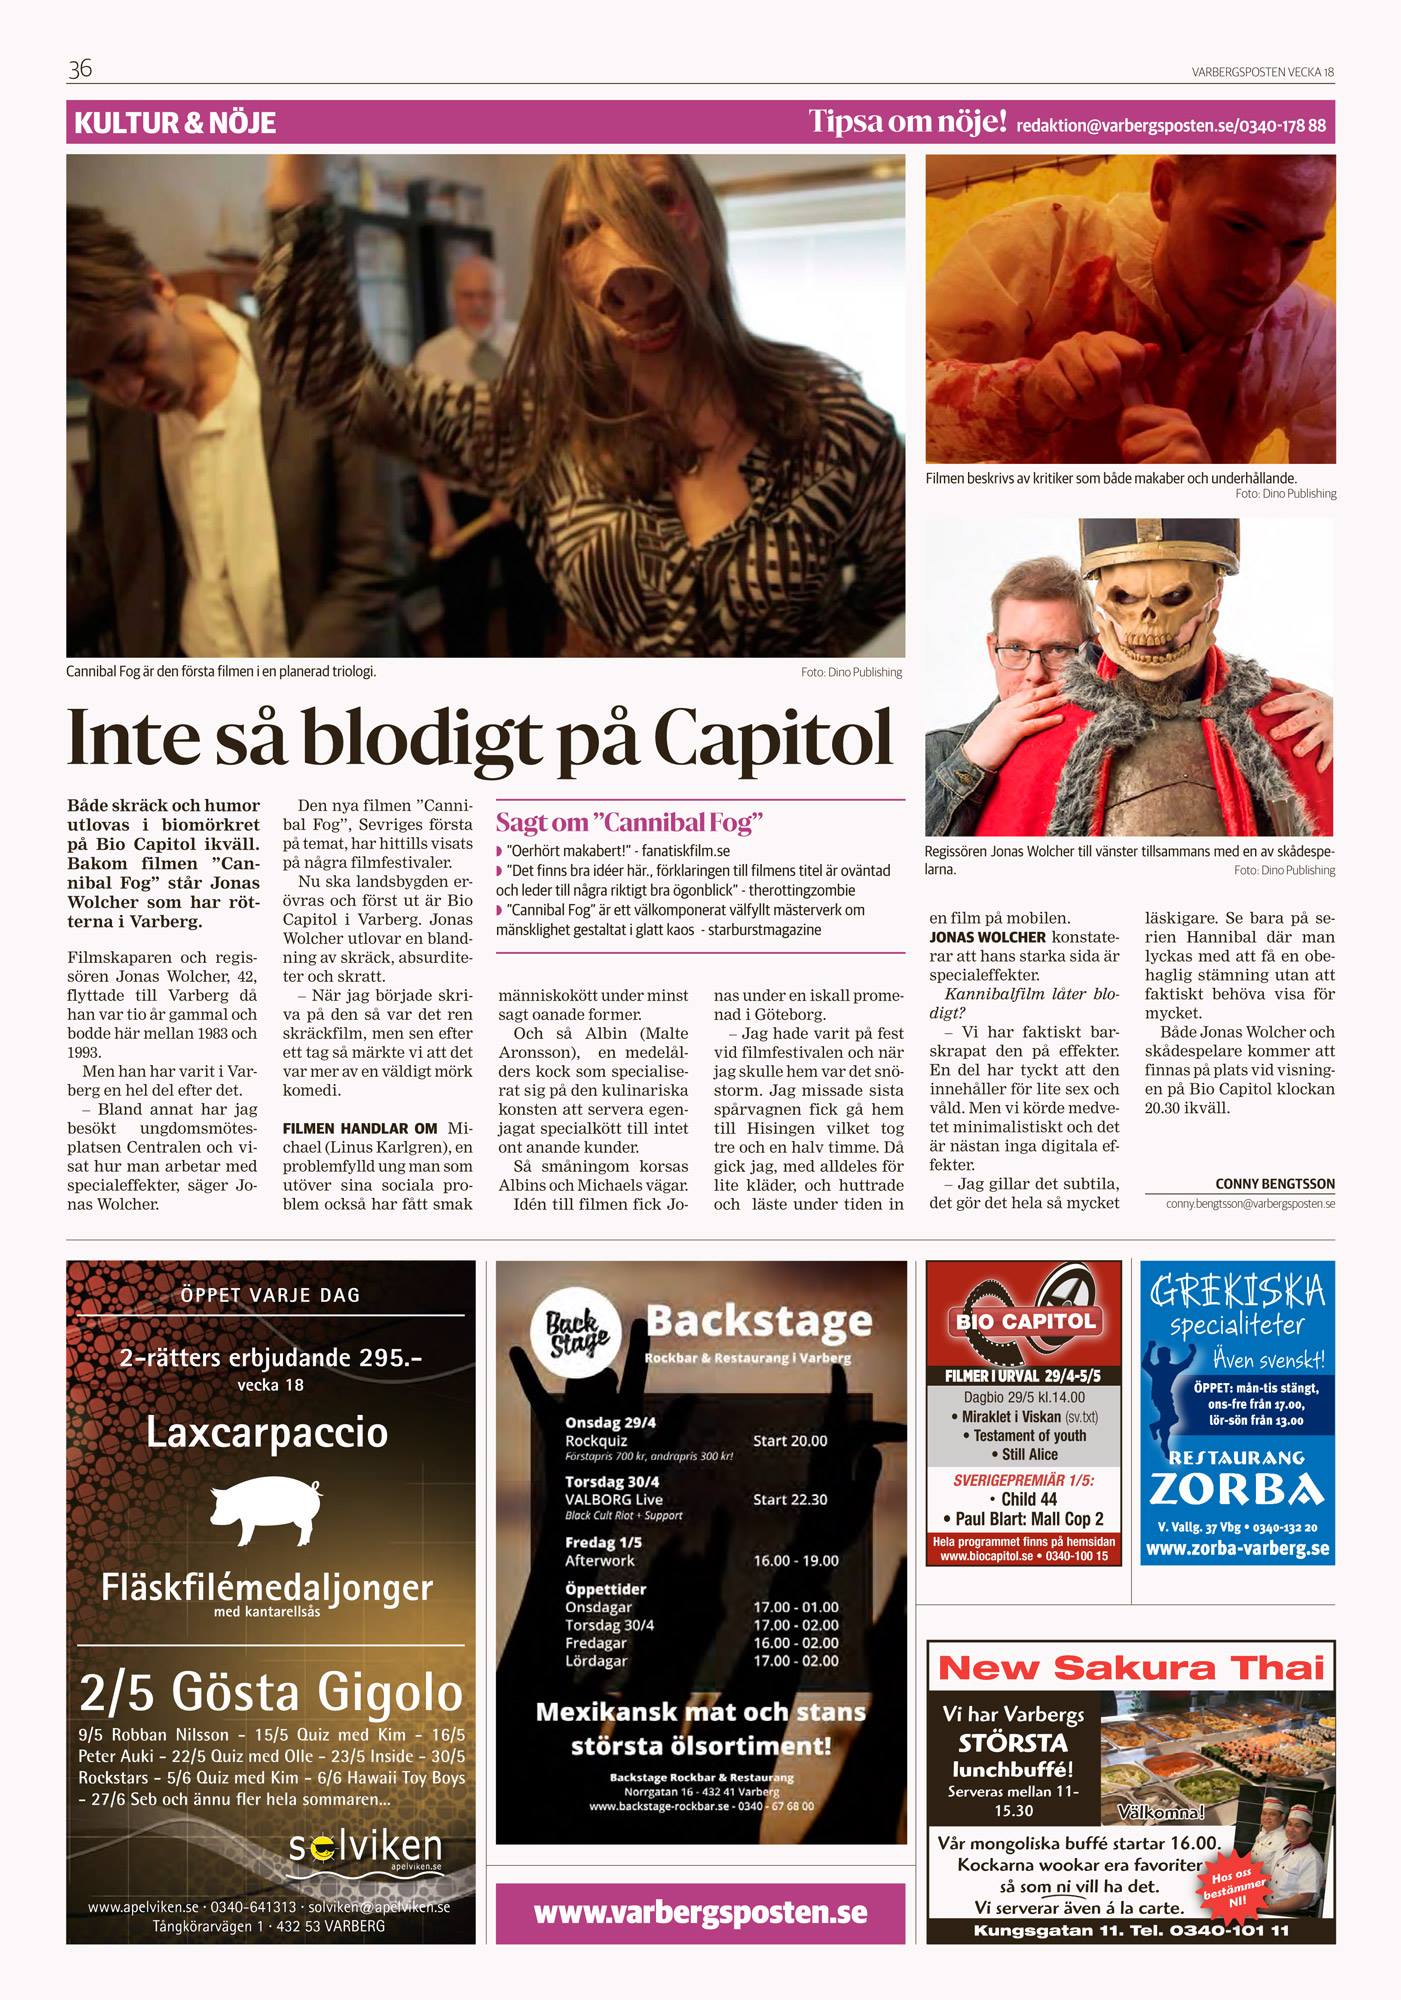 Varbergsposten 2015 about the screening at Bio Capitol the same week.